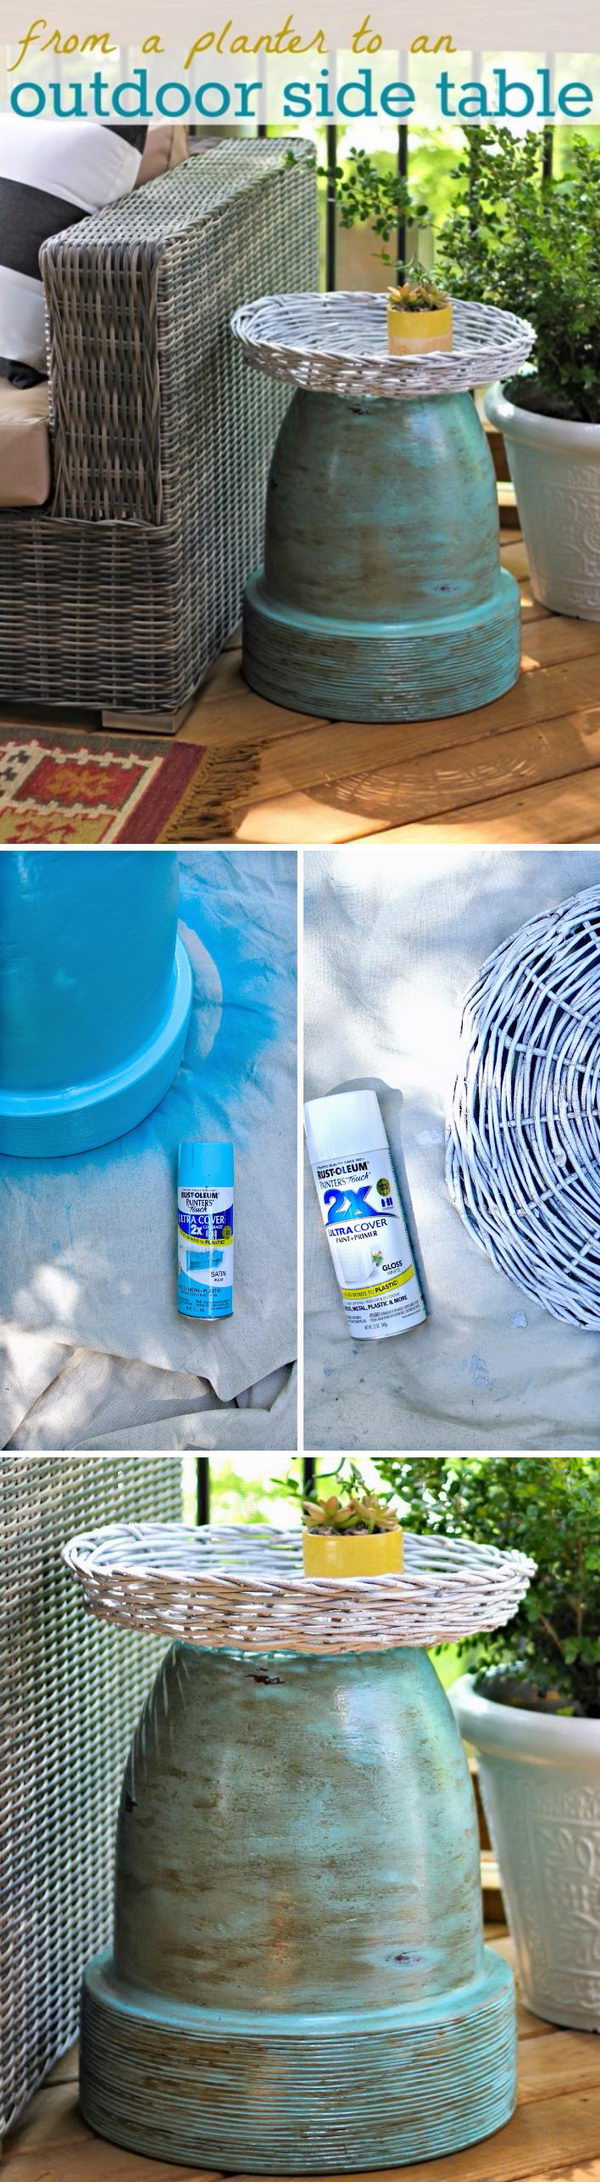 40+ Awesome DIY Side Table Ideas for Outdoors and Indoors